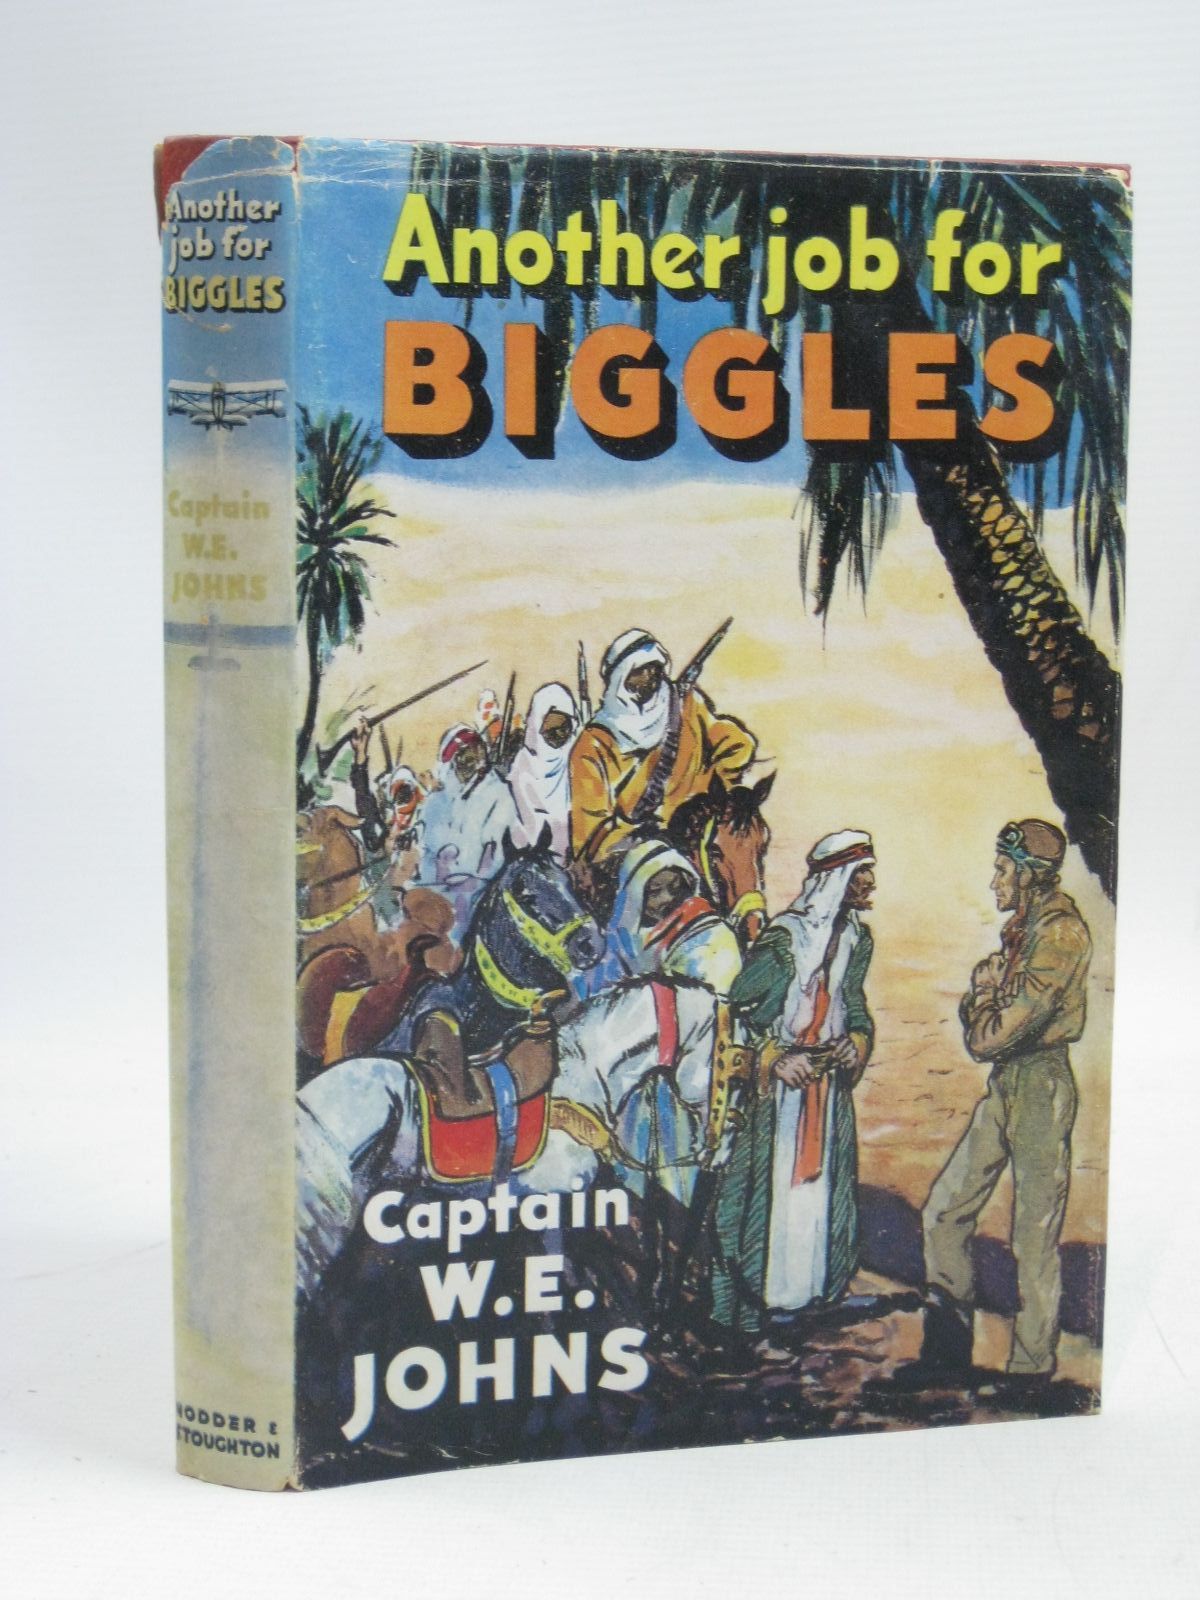 Cover of ANOTHER JOB FOR BIGGLES by W.E. Johns